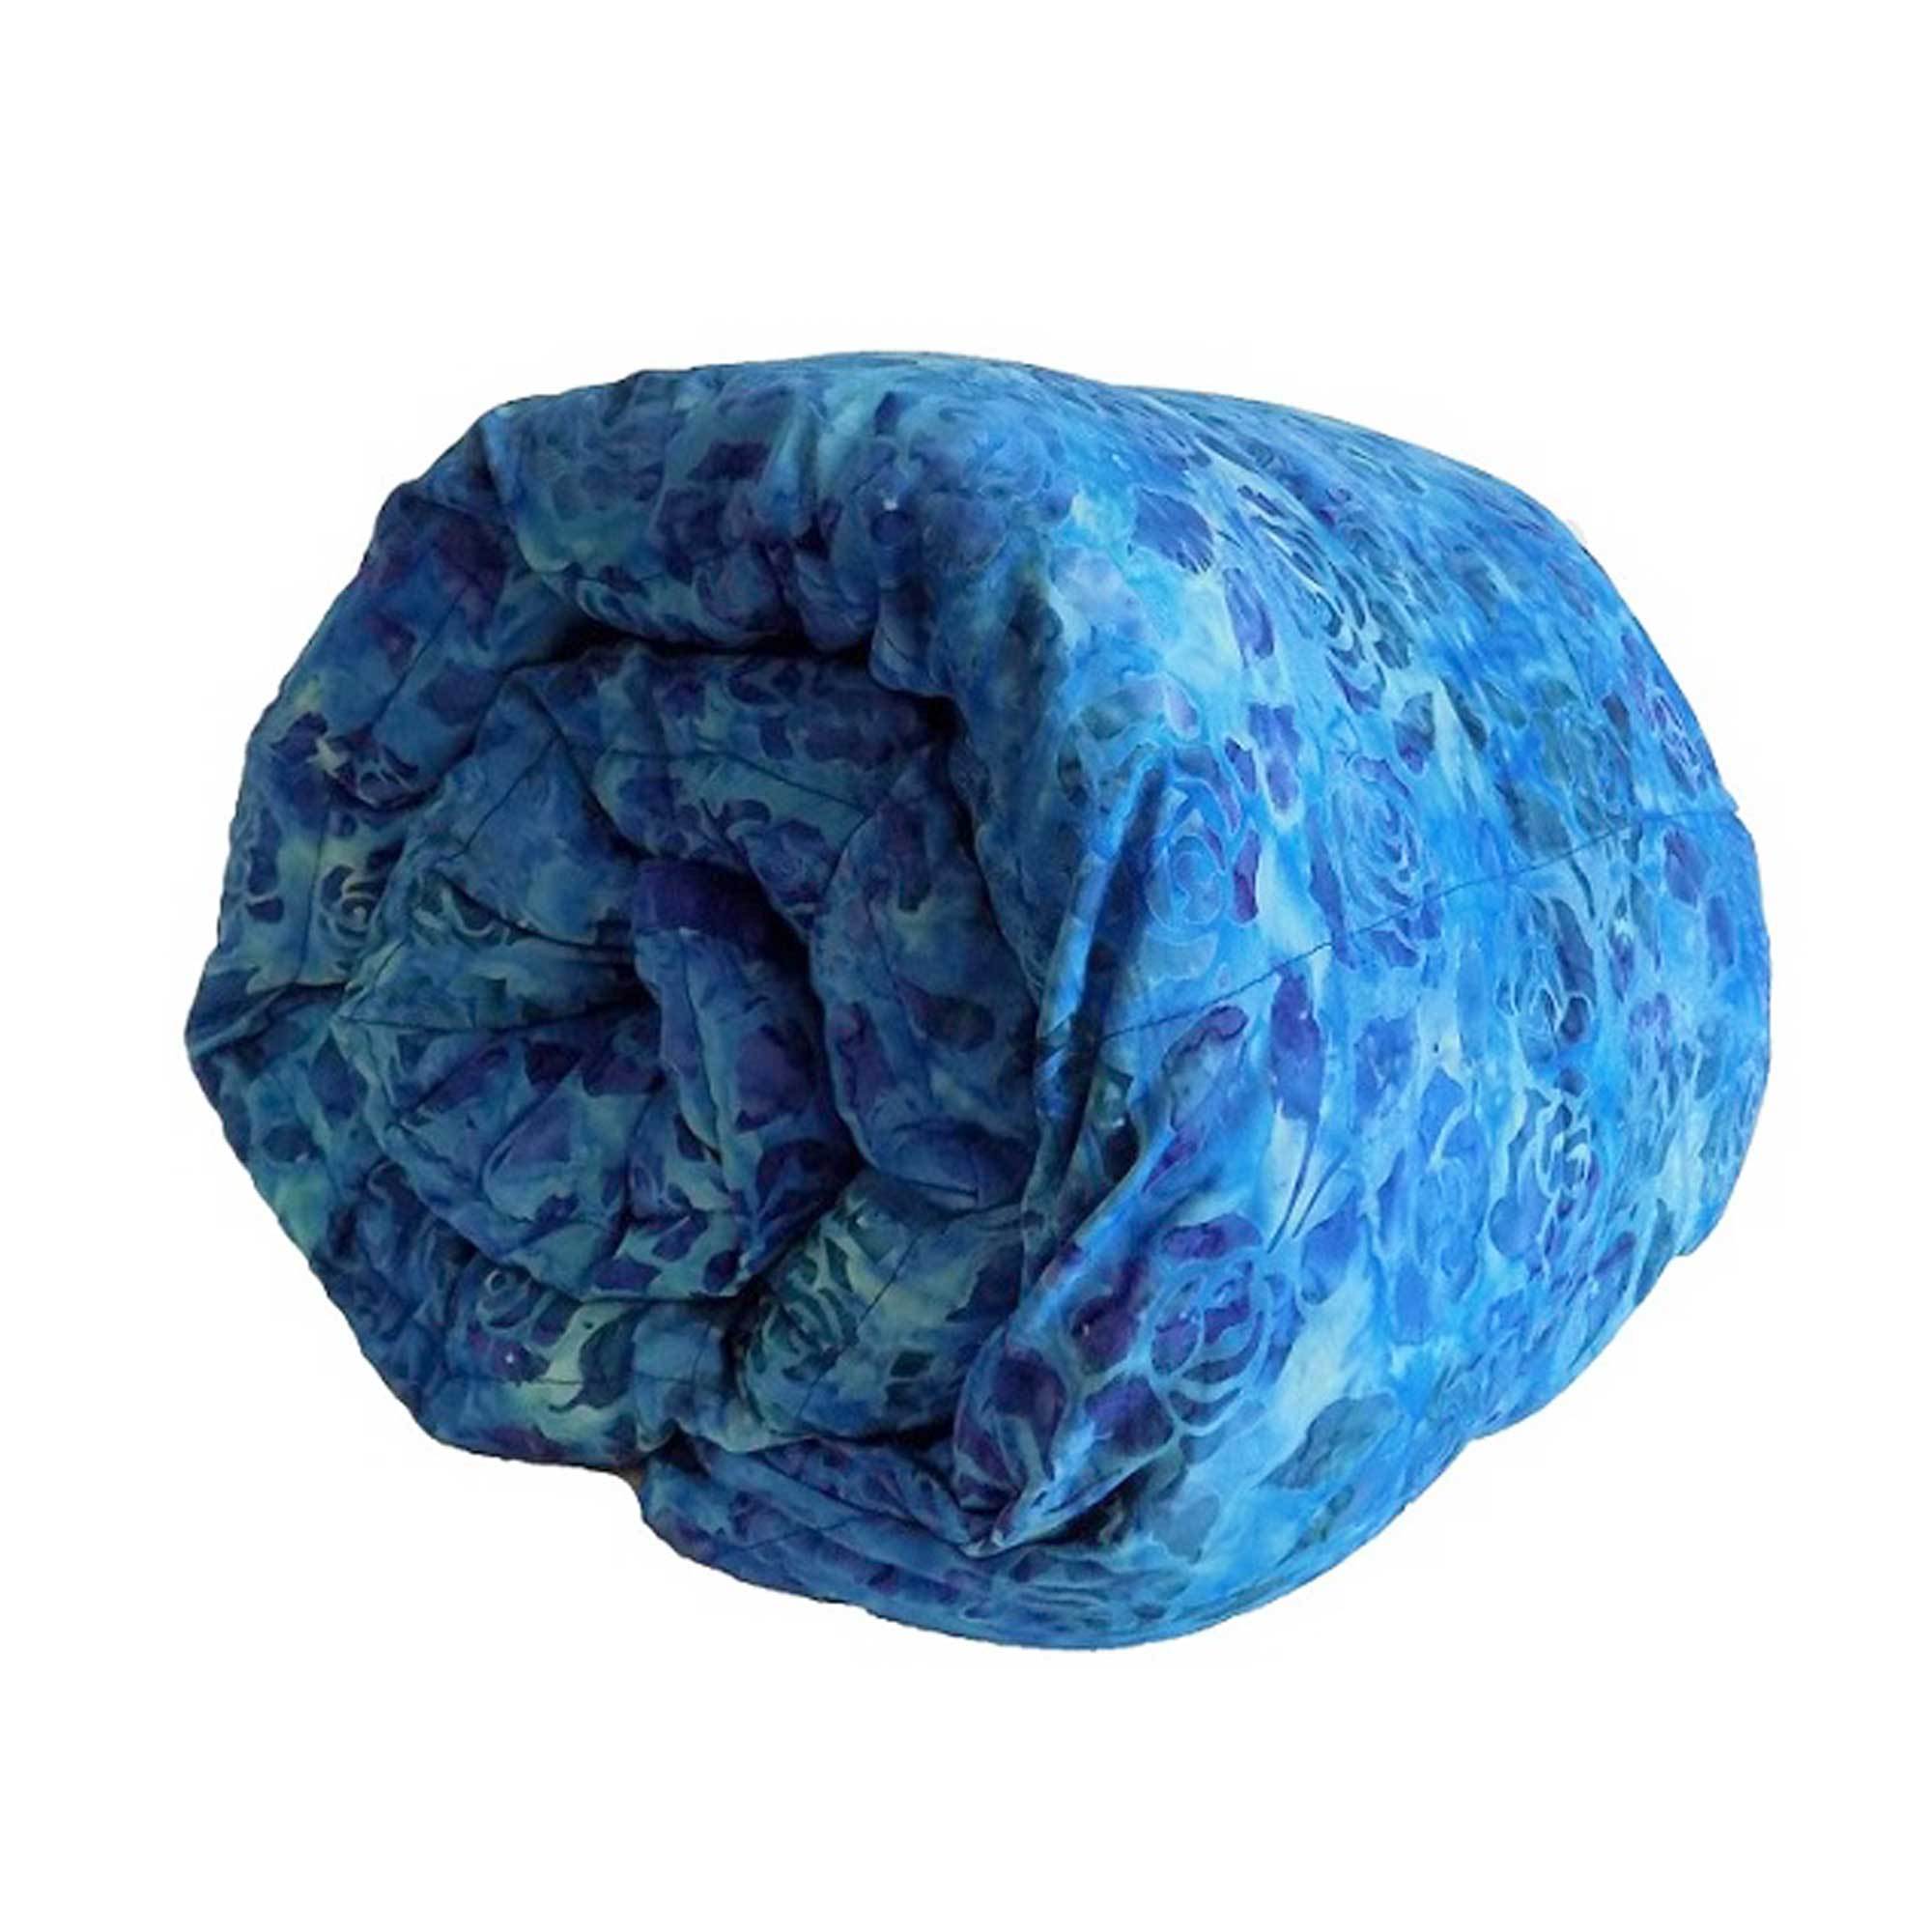 Mosaic Weighted Blankets Blue Roses Weighted Blanket